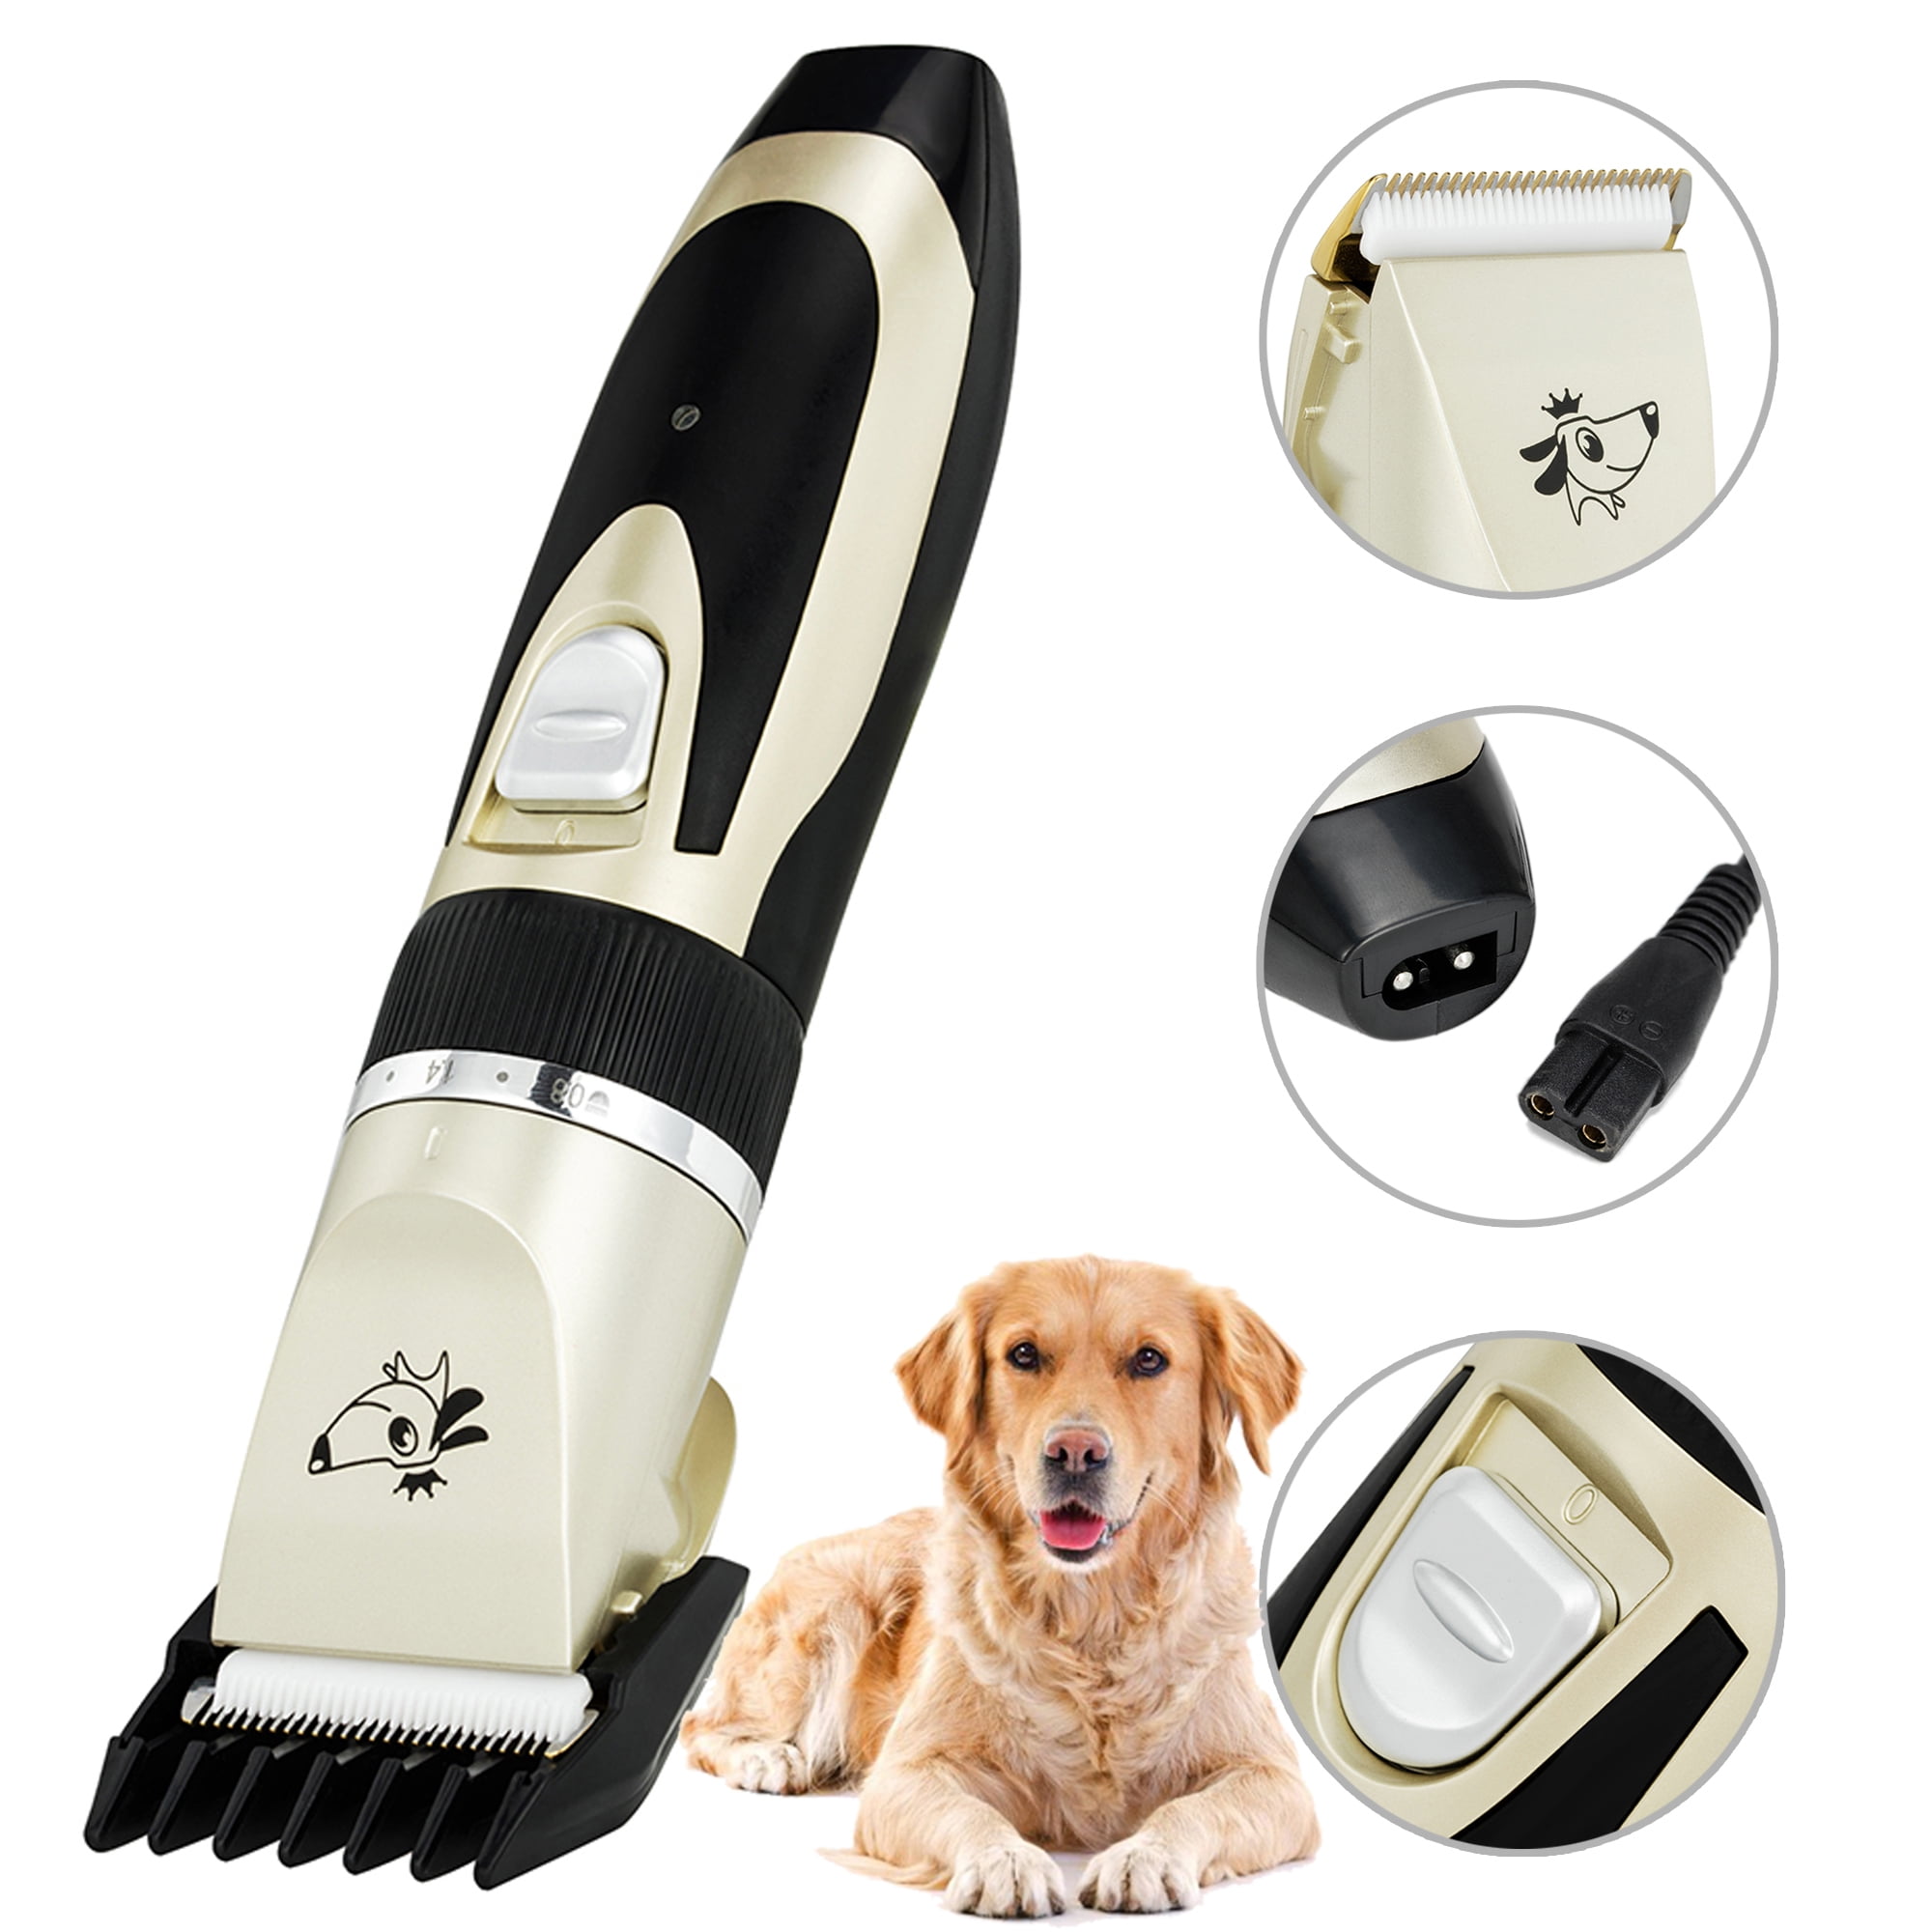 pets at home dog grooming clippers